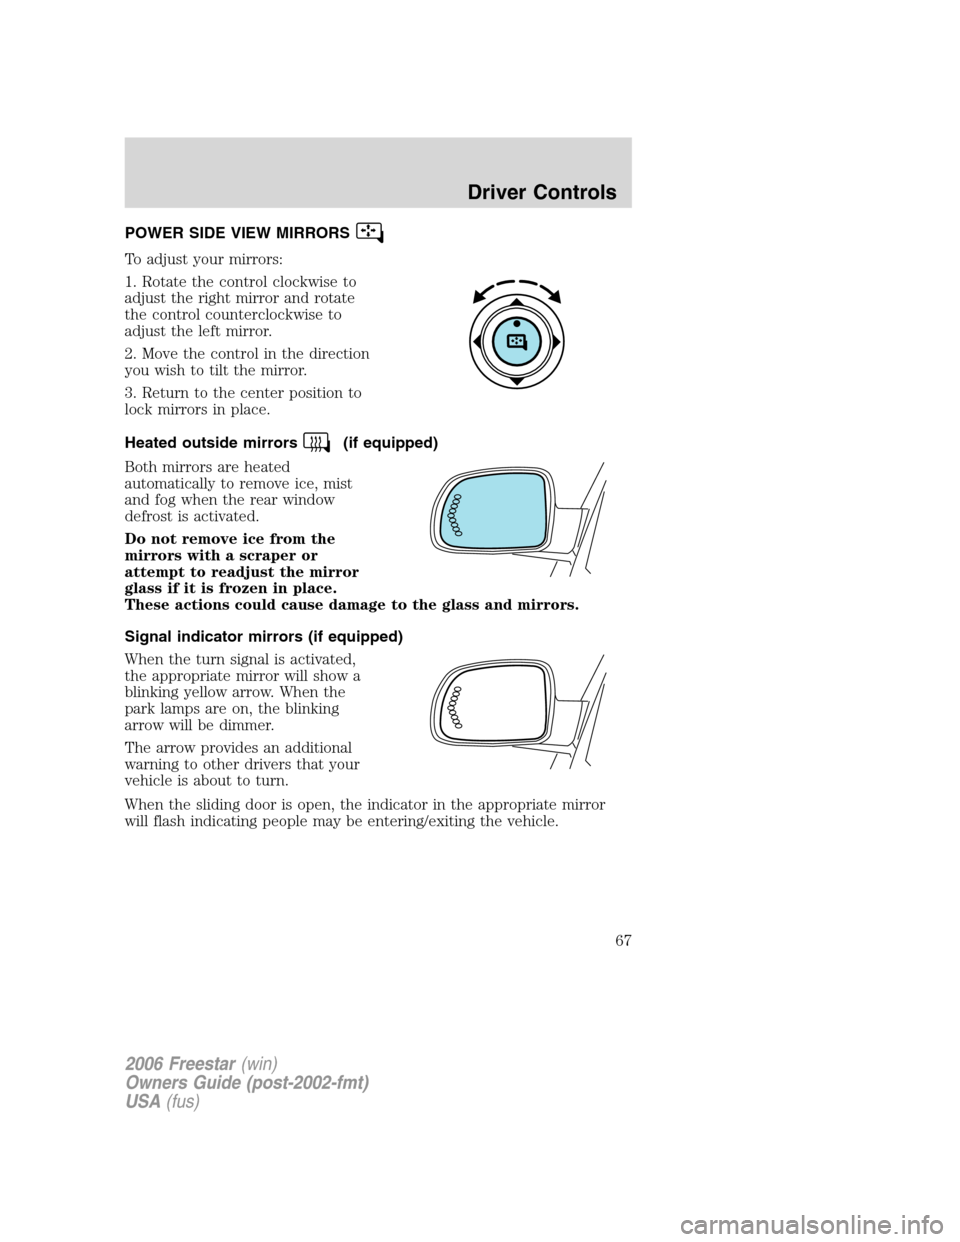 FORD FREESTAR 2006 1.G User Guide POWER SIDE VIEW MIRRORS
To adjust your mirrors:
1. Rotate the control clockwise to
adjust the right mirror and rotate
the control counterclockwise to
adjust the left mirror.
2. Move the control in the